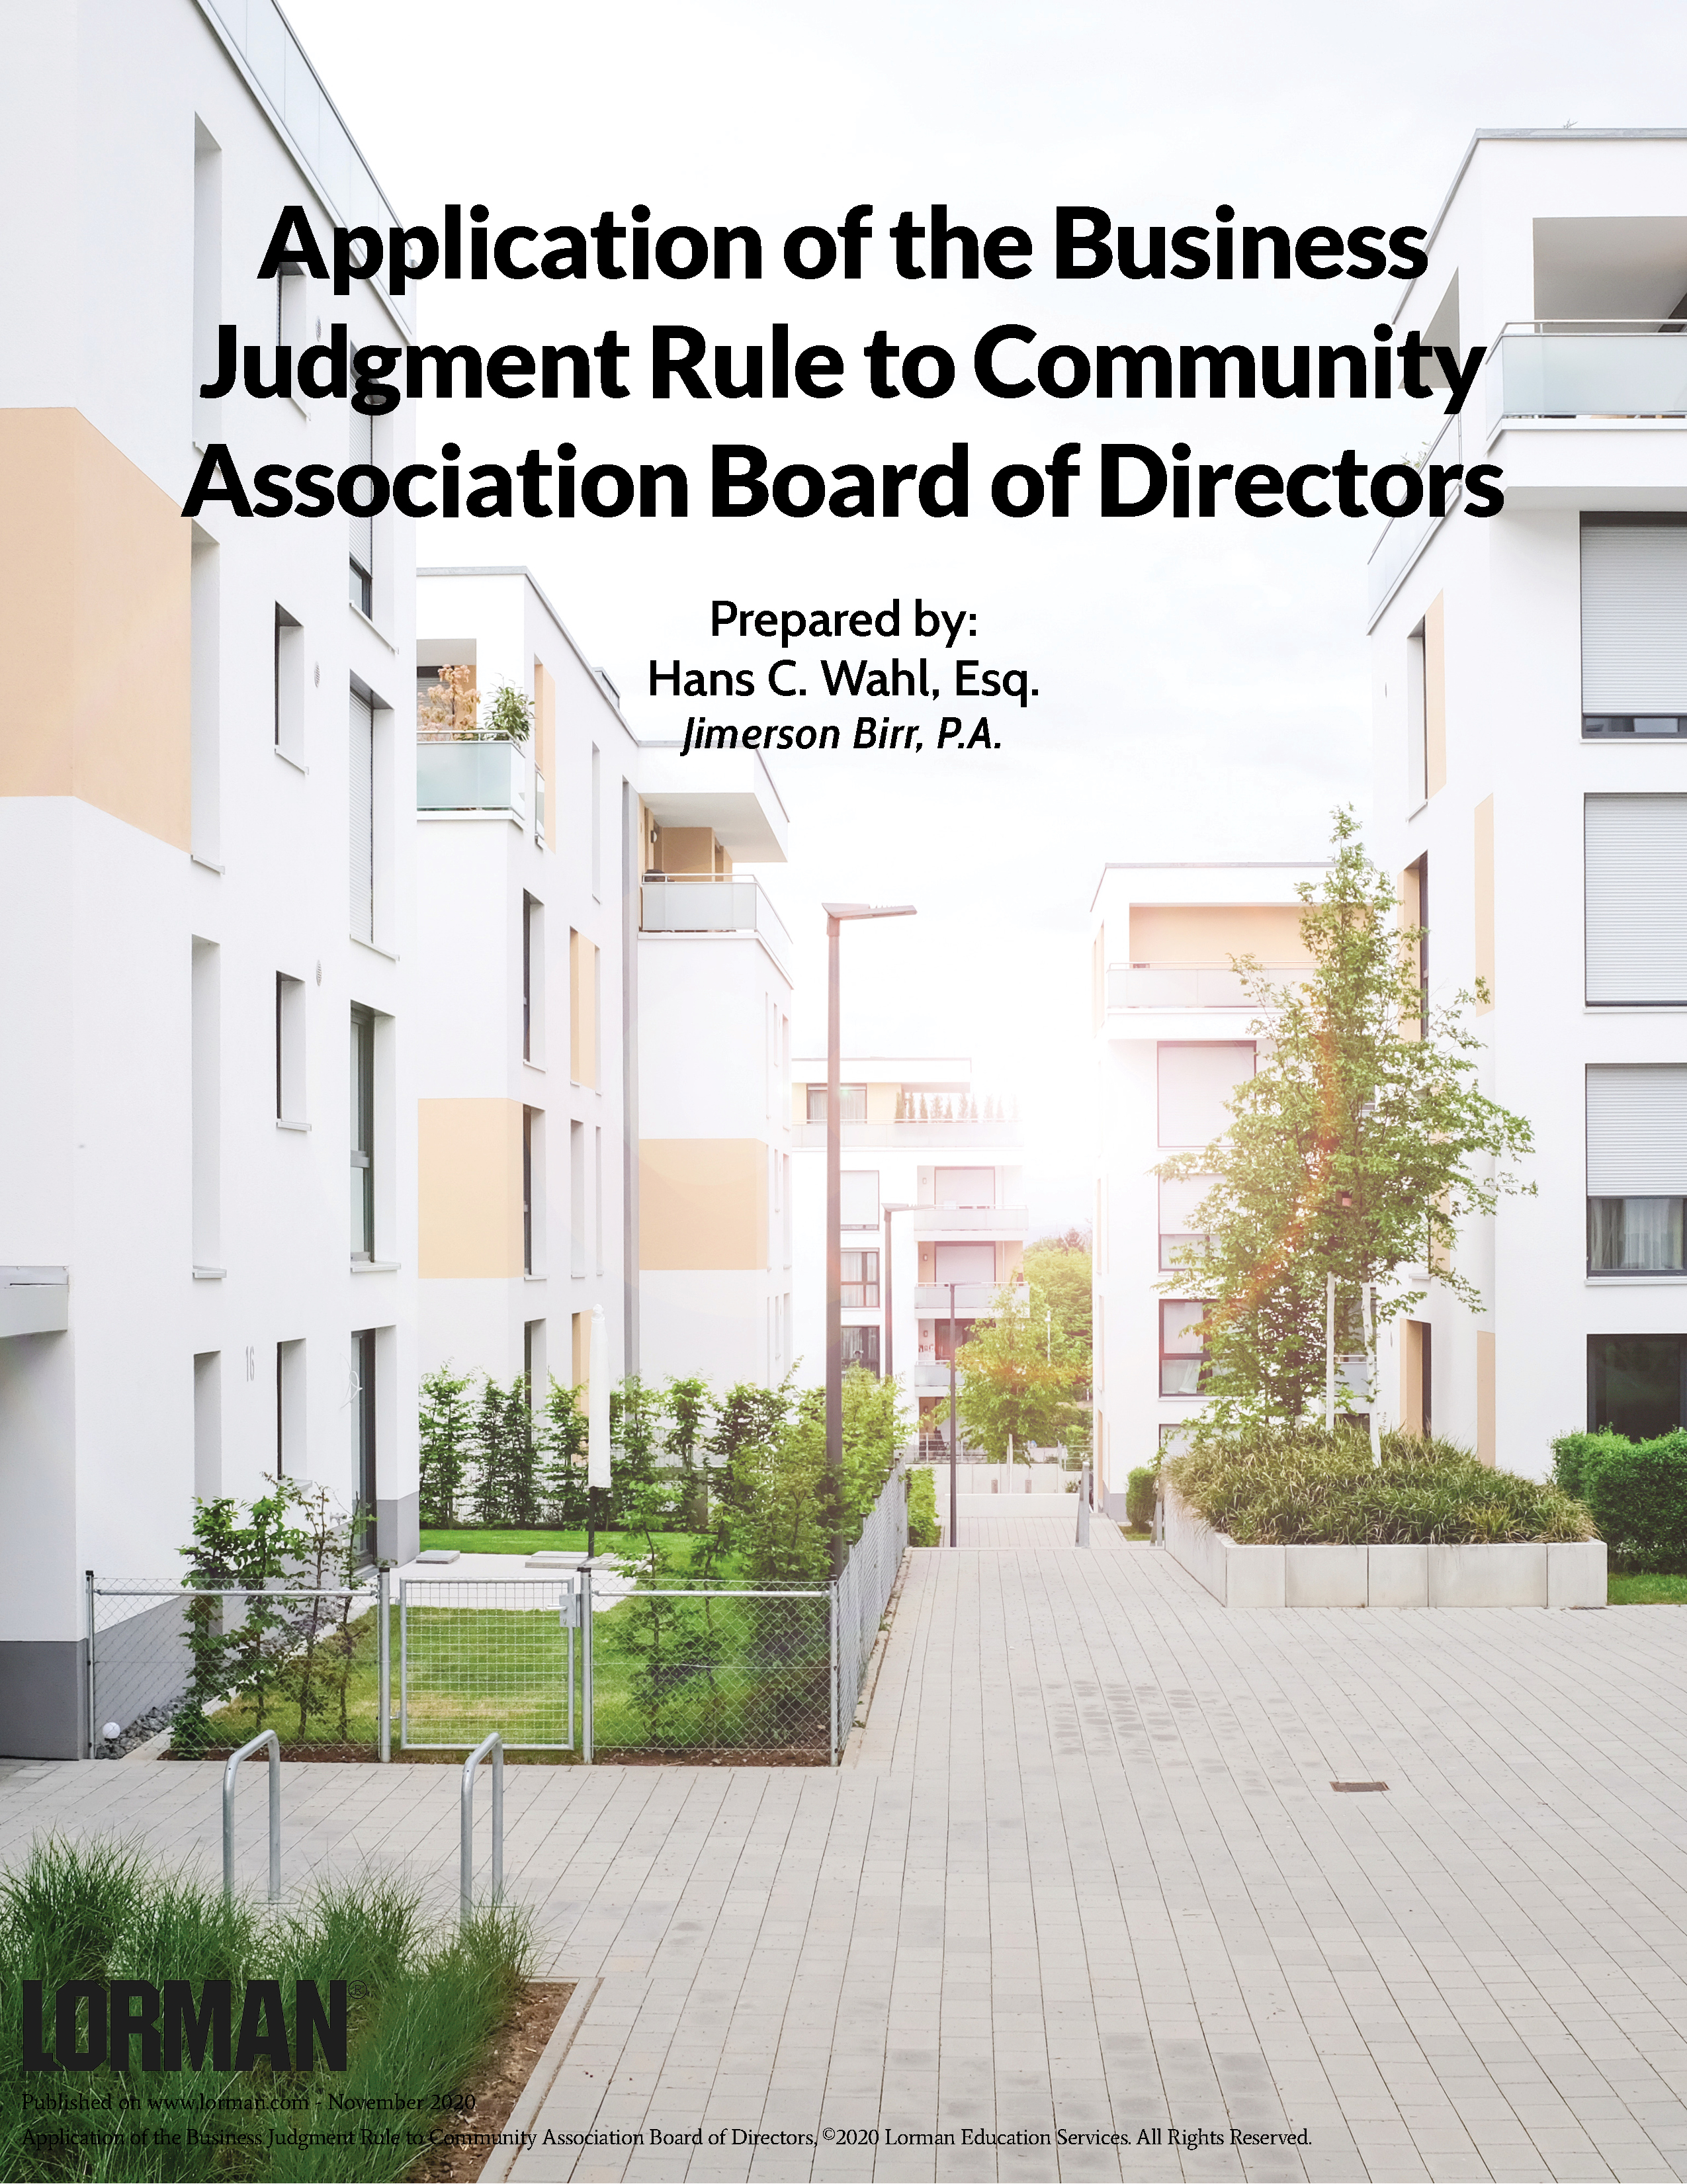 Application of the Business Judgment Rule to Community Association Board of Directors